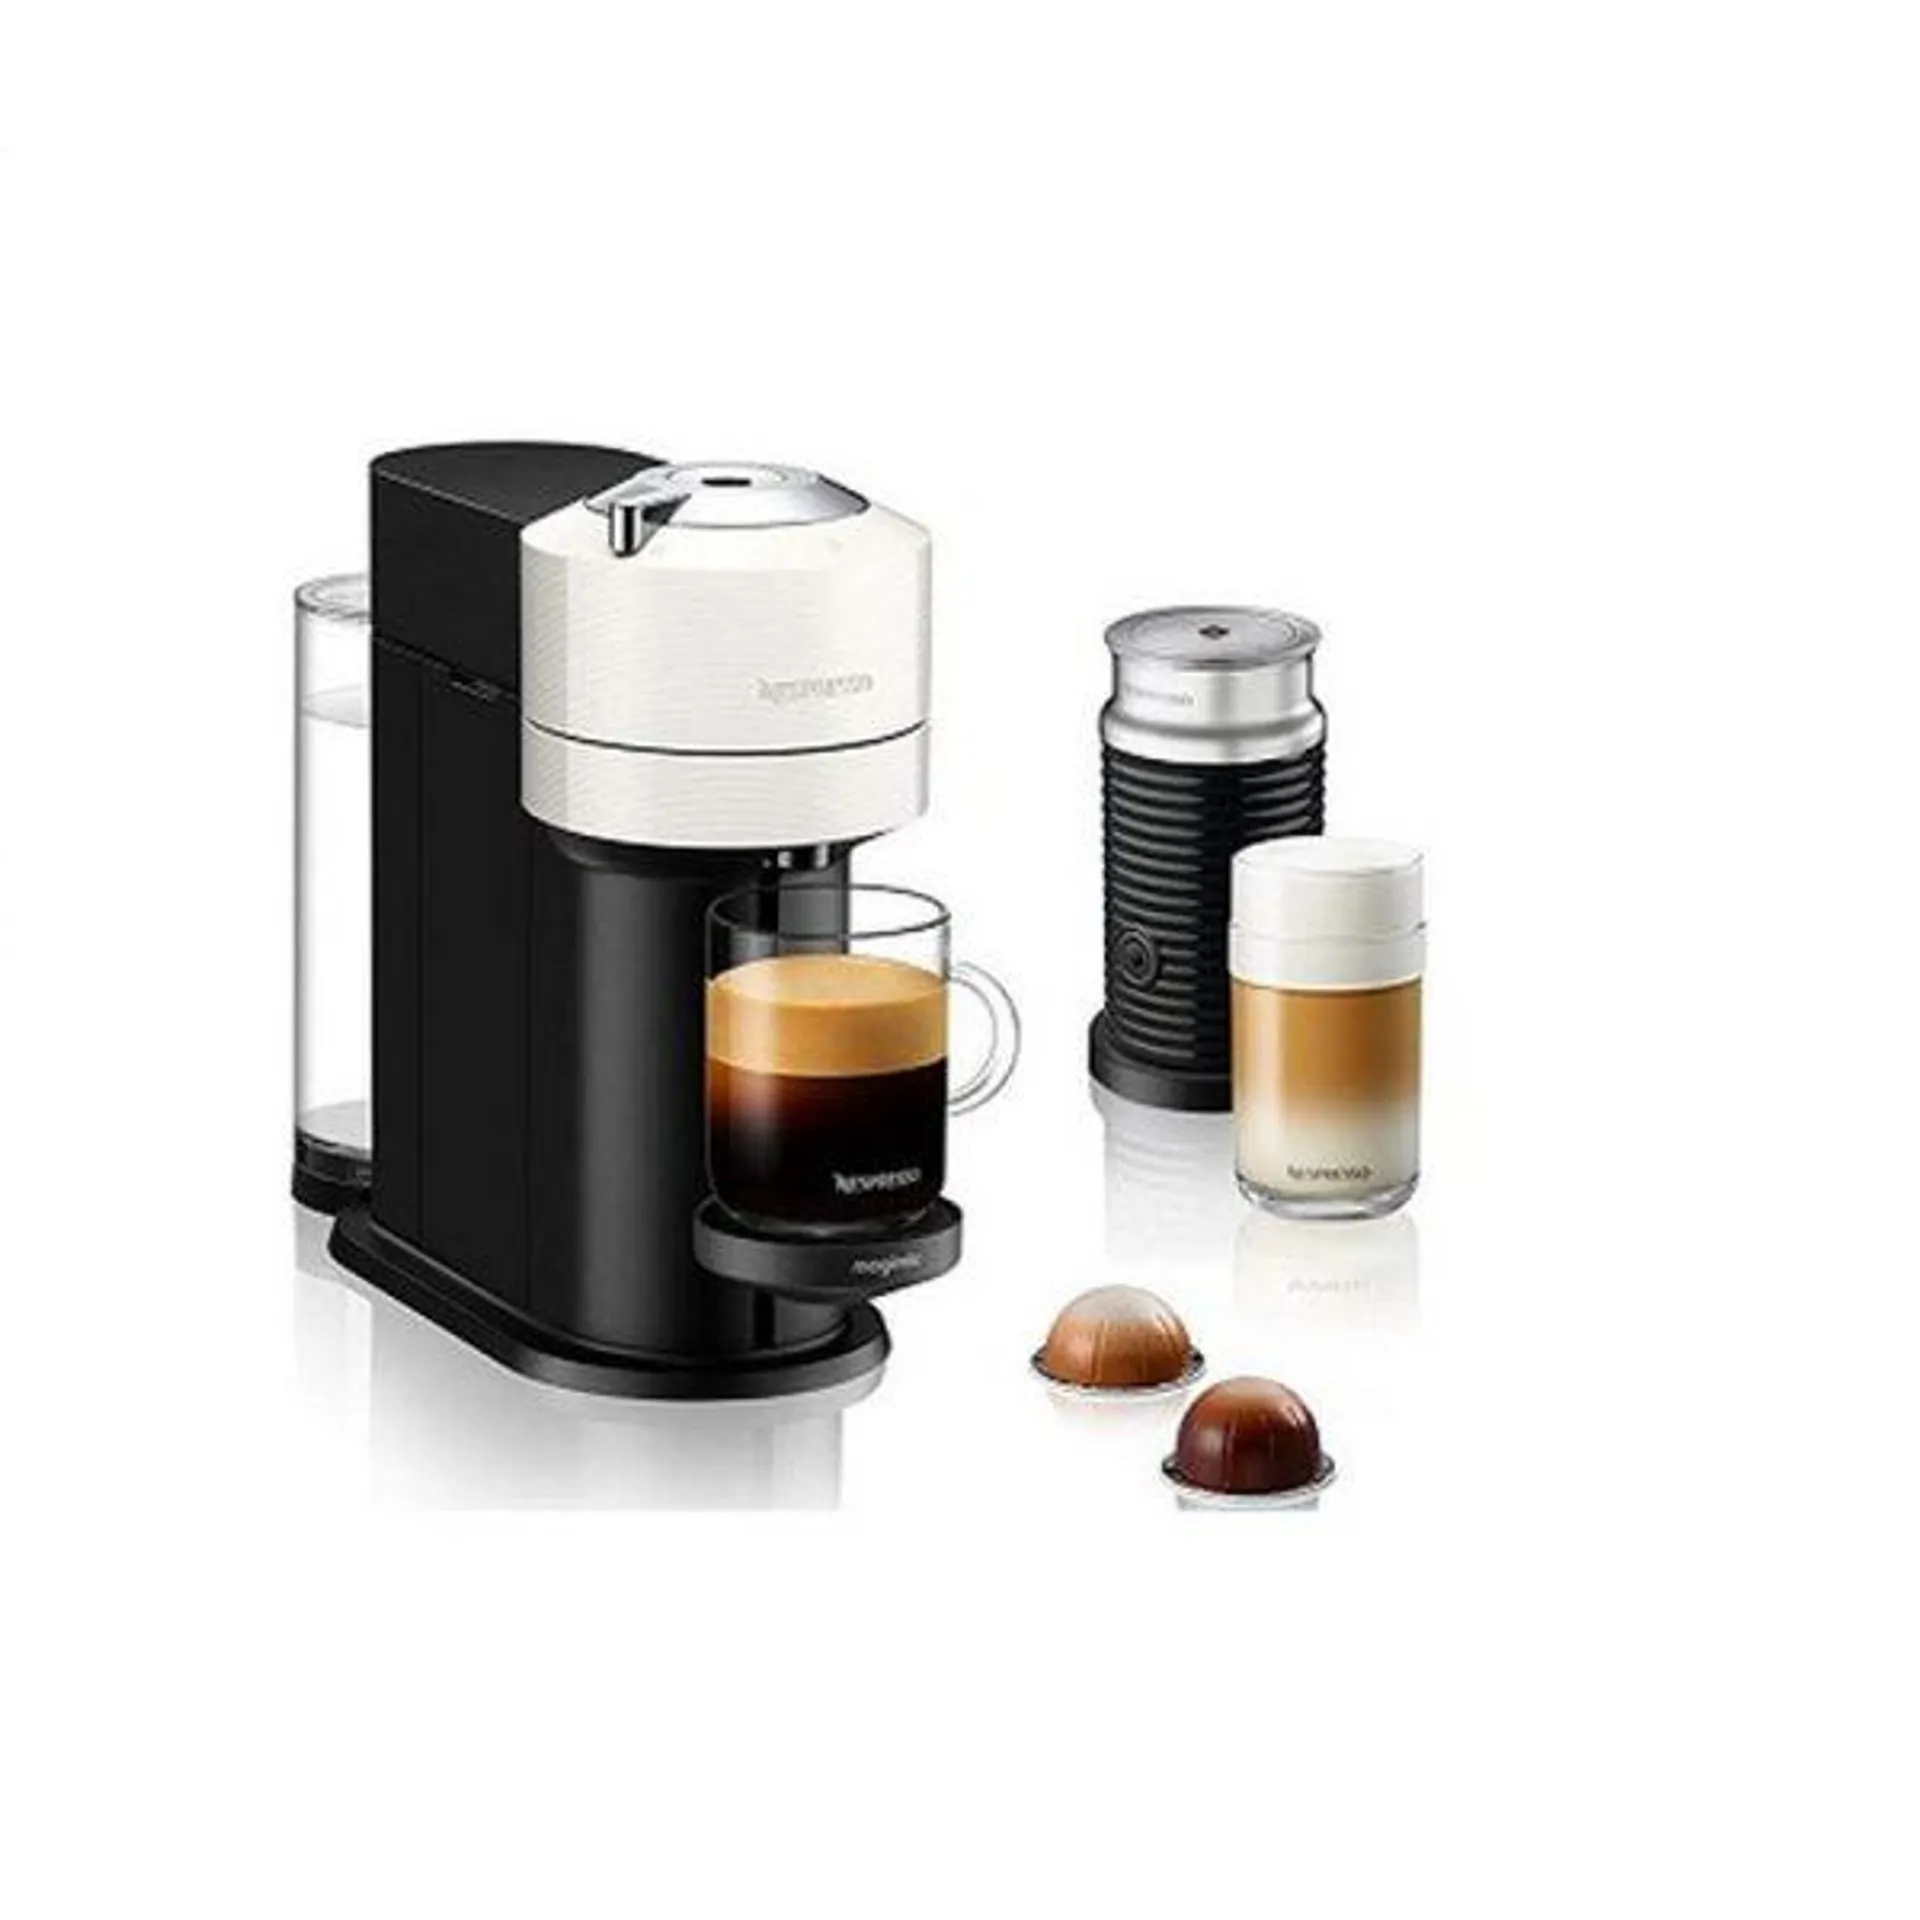 Nespresso Vertuo Next Coffee Machine with Milk Frother by Magimix